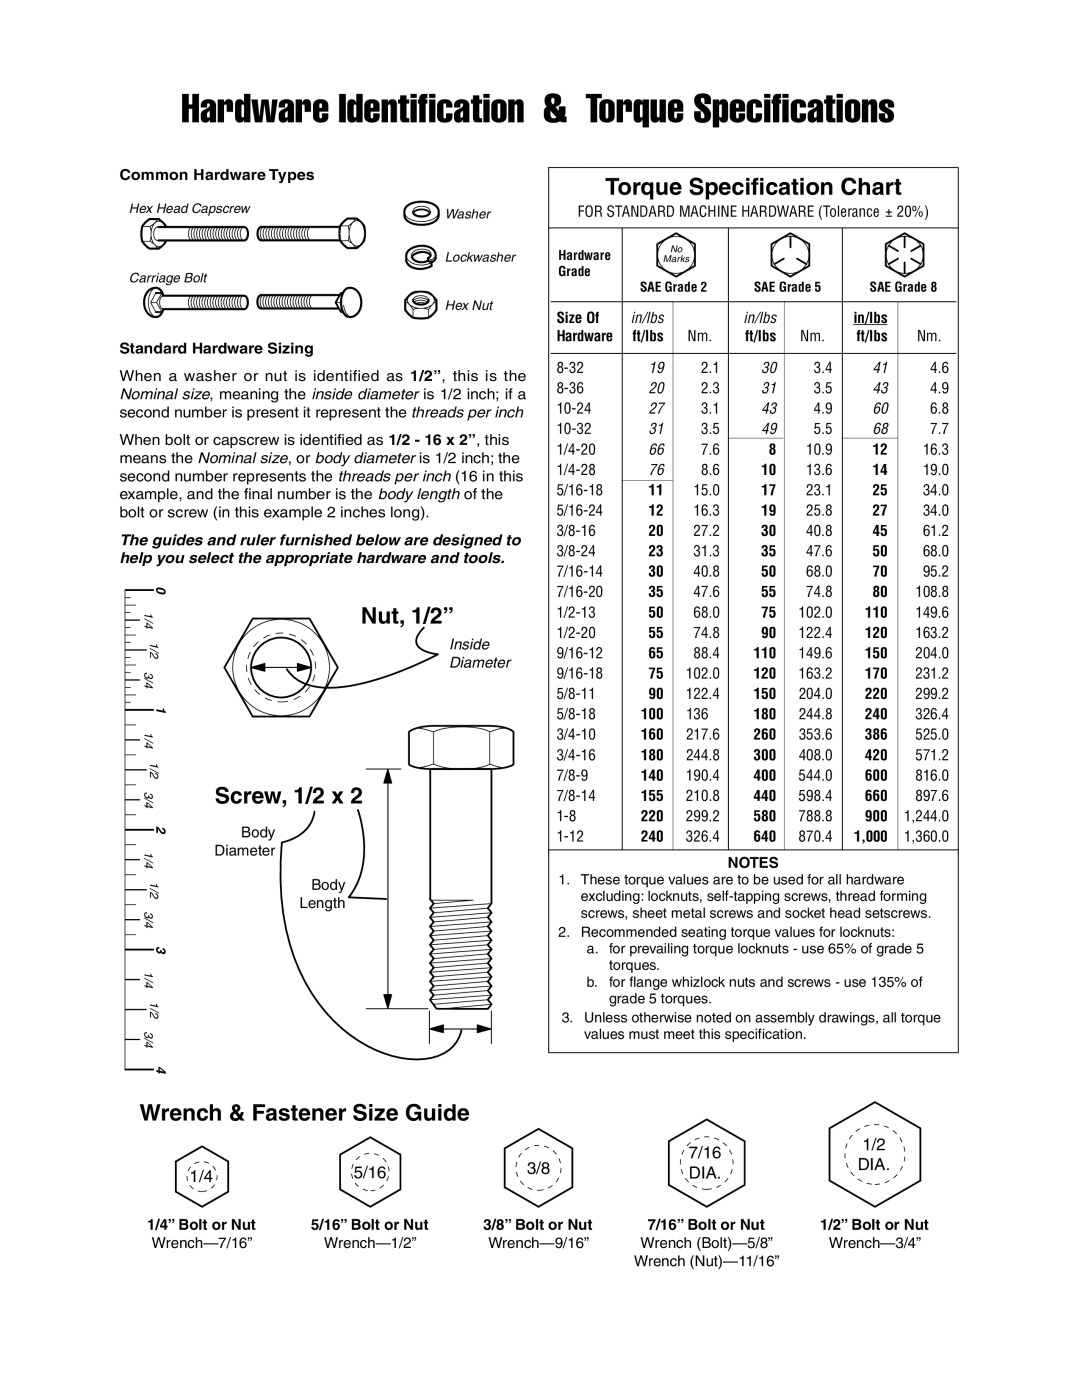 Snapper 4561 Wrench & Fastener Size Guide, Hardware Identification & Torque Specifications, Torque Specification Chart 